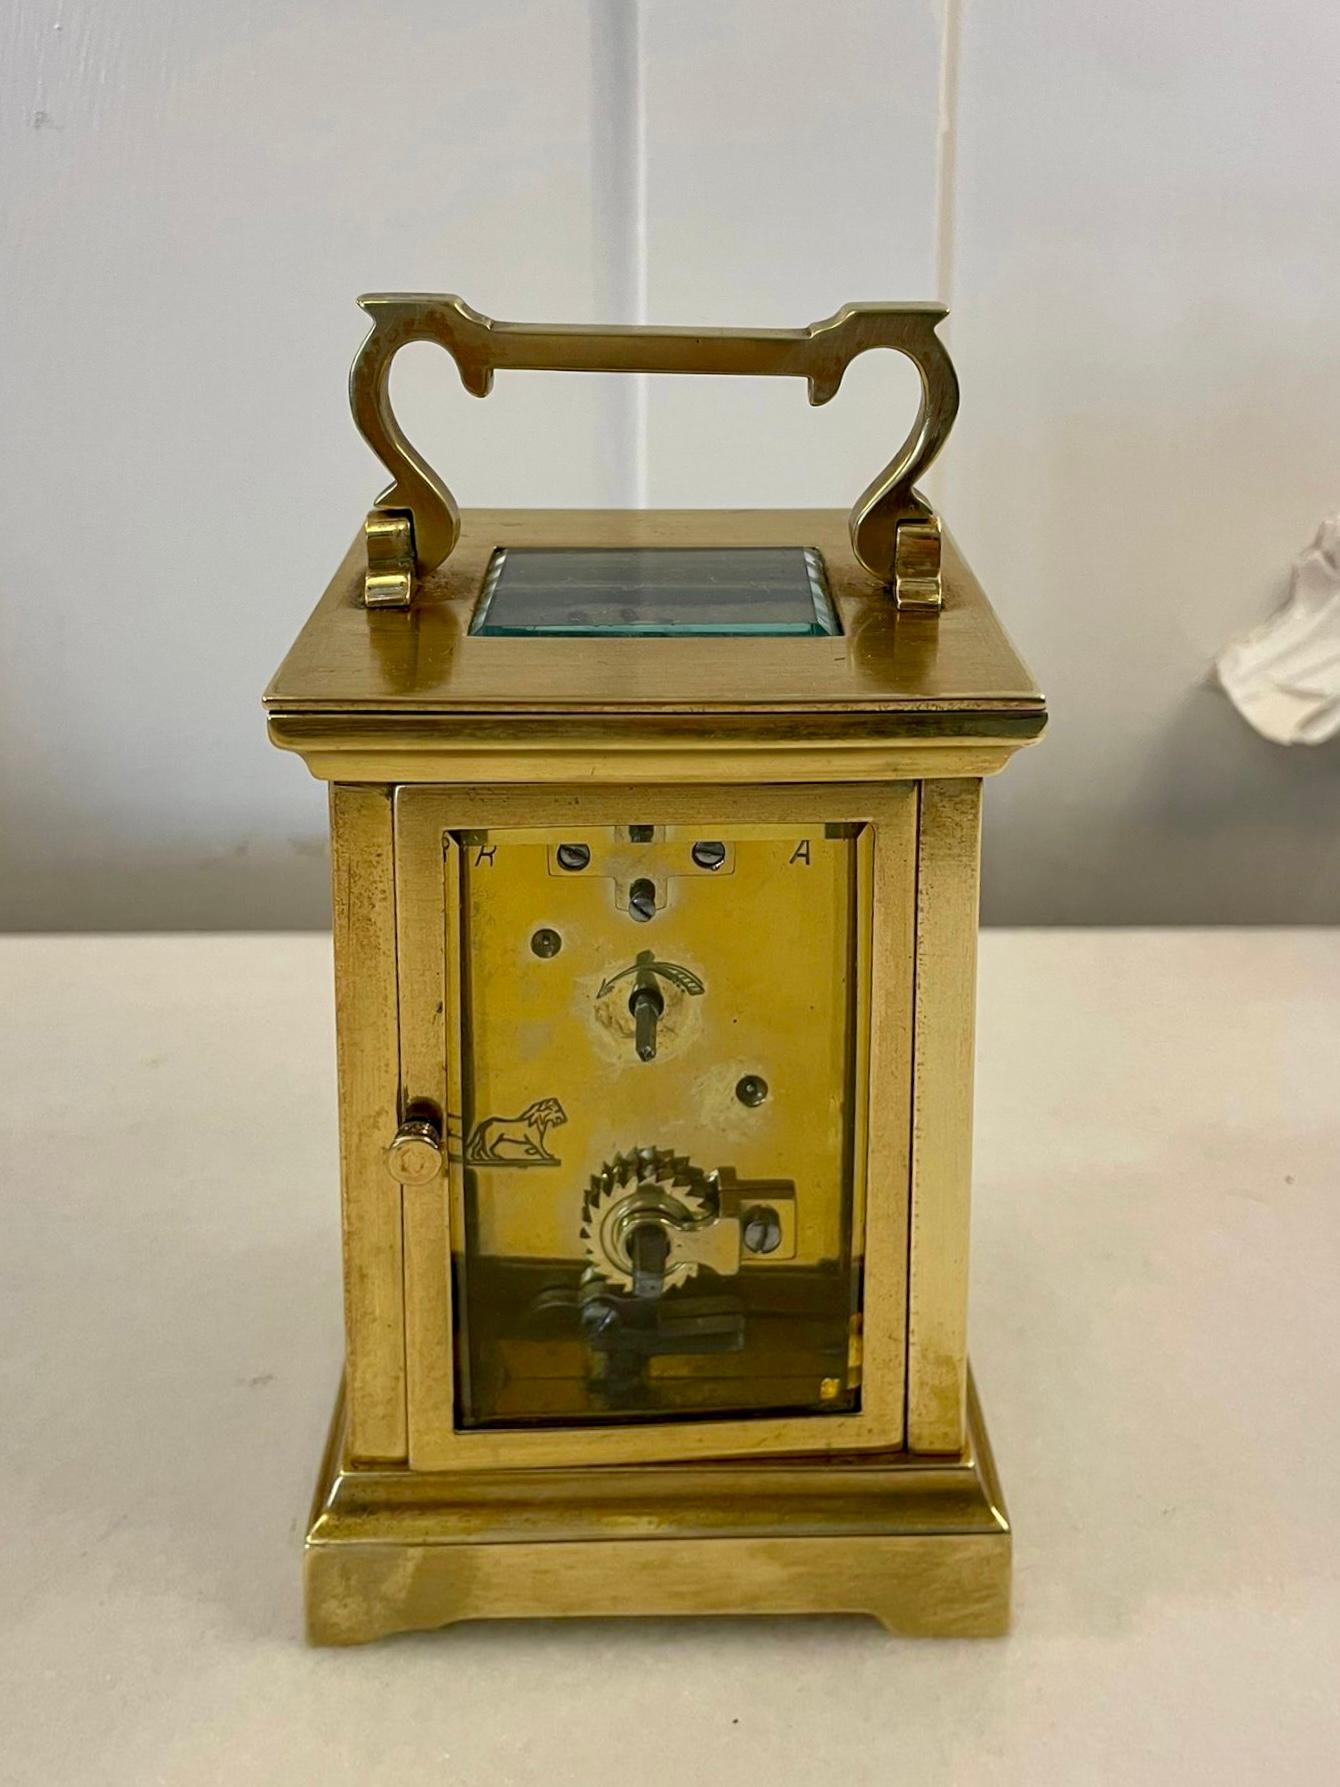 Antique Victorian quality brass carriage clock having a bevelled edge,  glass panels,  white enamel dial with Roman numerals,  original hands,  8 day movement and a shaped carrying handle to the top


In good working order


Dimensions:
Height 14.5